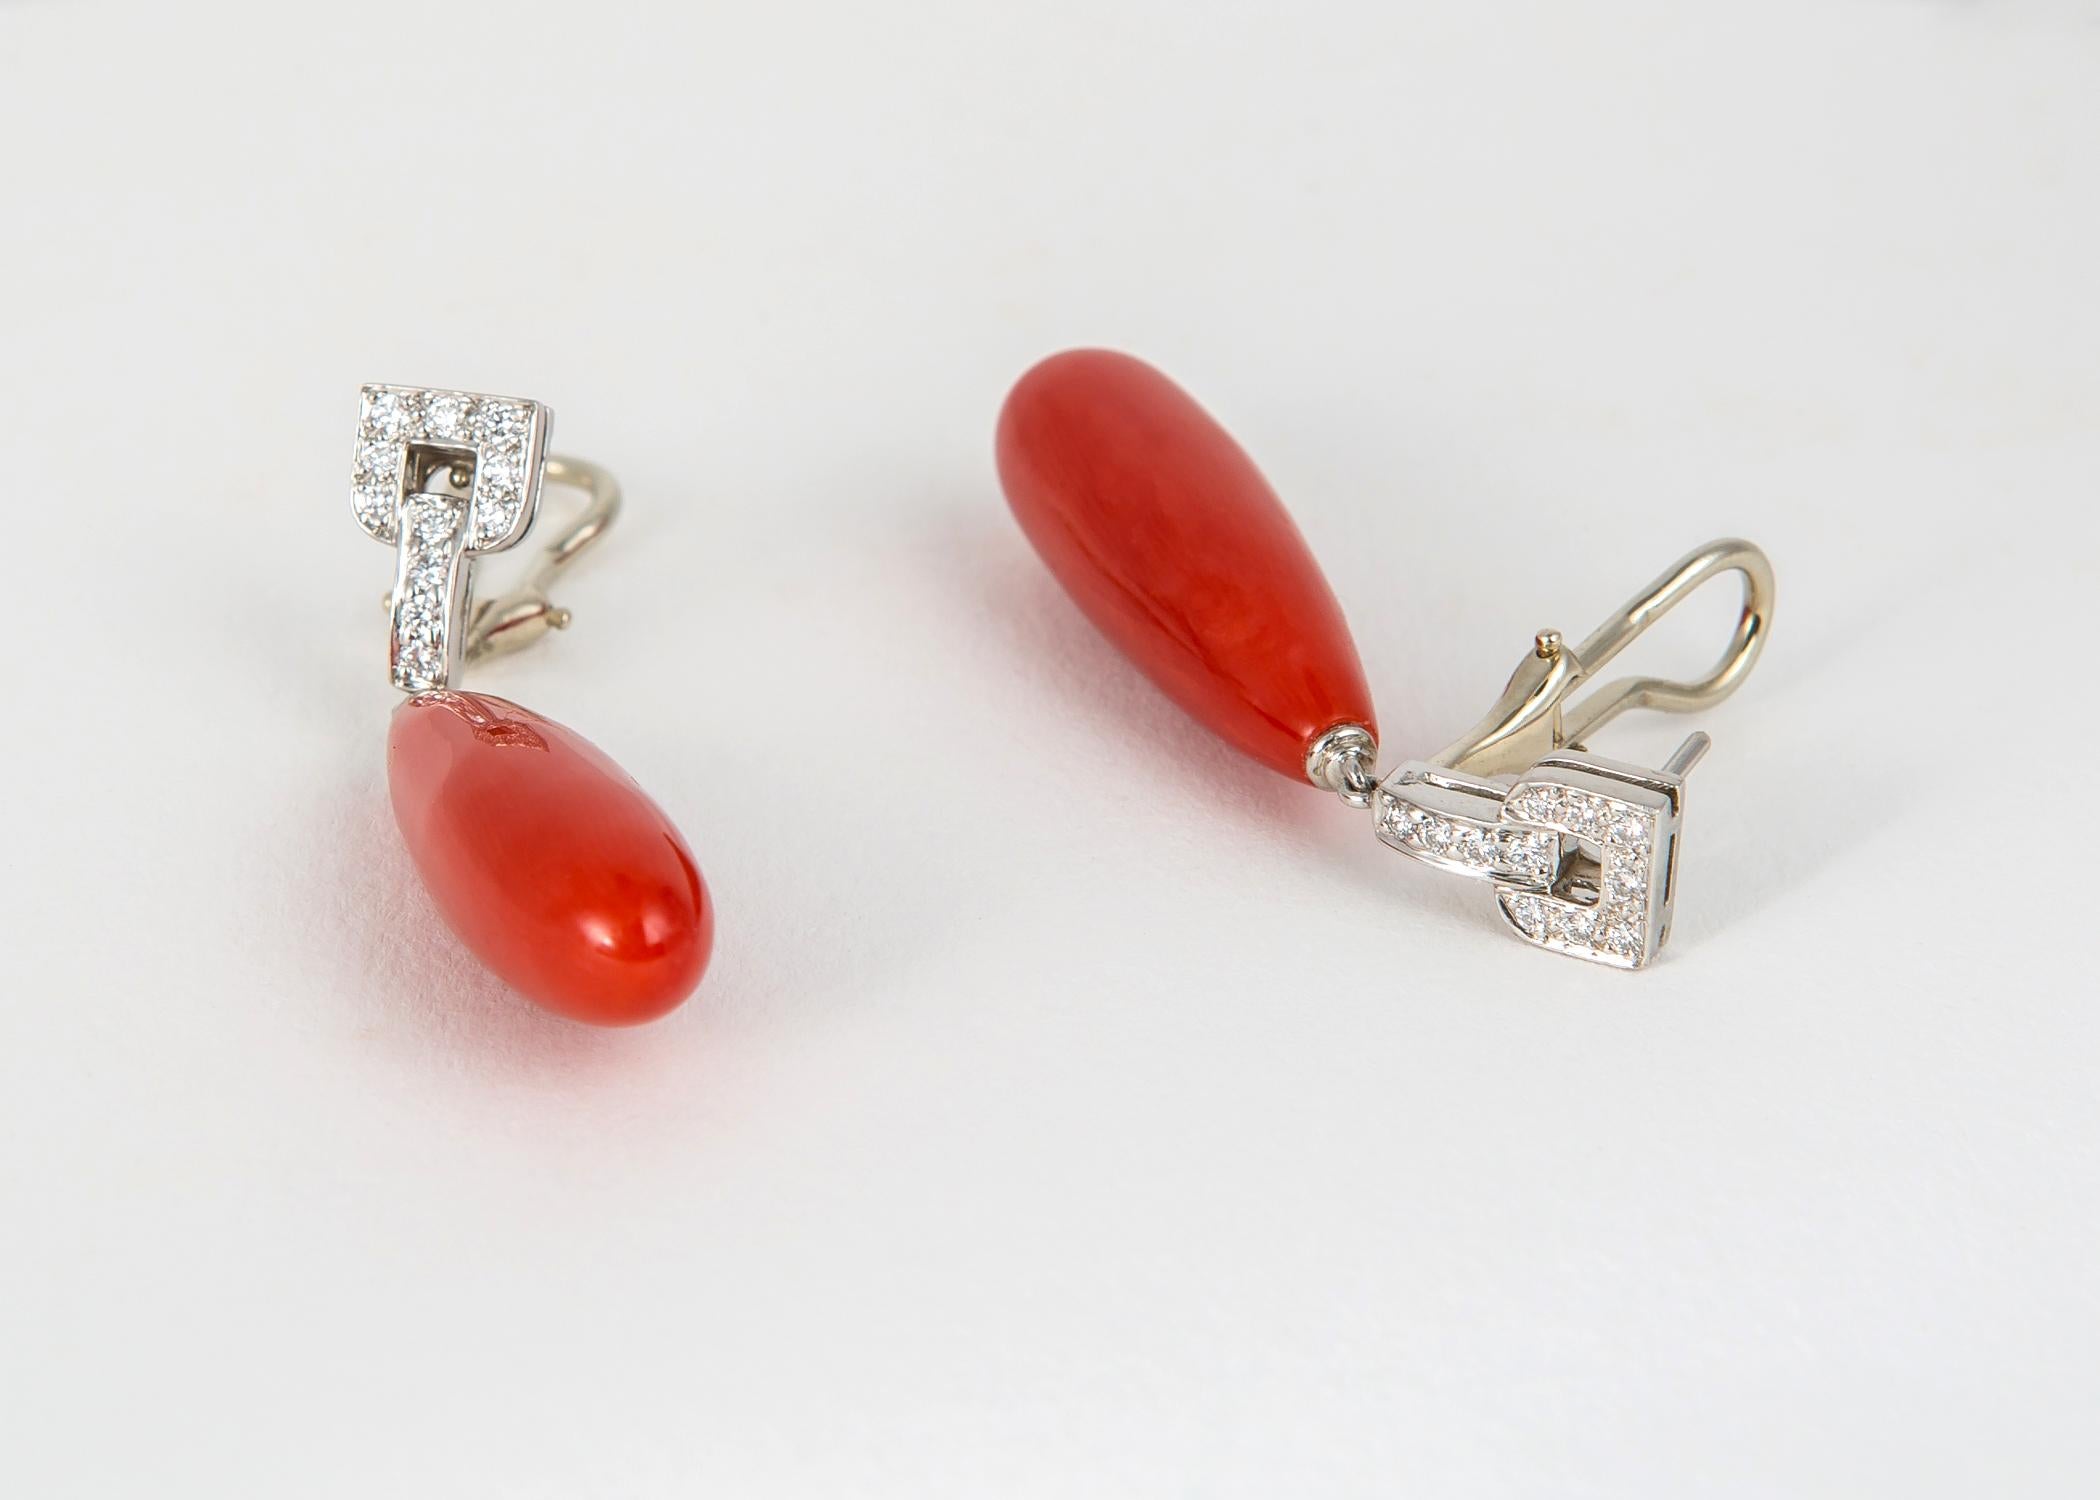 Tiffany & Co. showcases a truly exceptional matched pair of vivid dark orange coral drops with the simple elegance of platinum and diamonds. 1 3/4 inches. A collectors item.